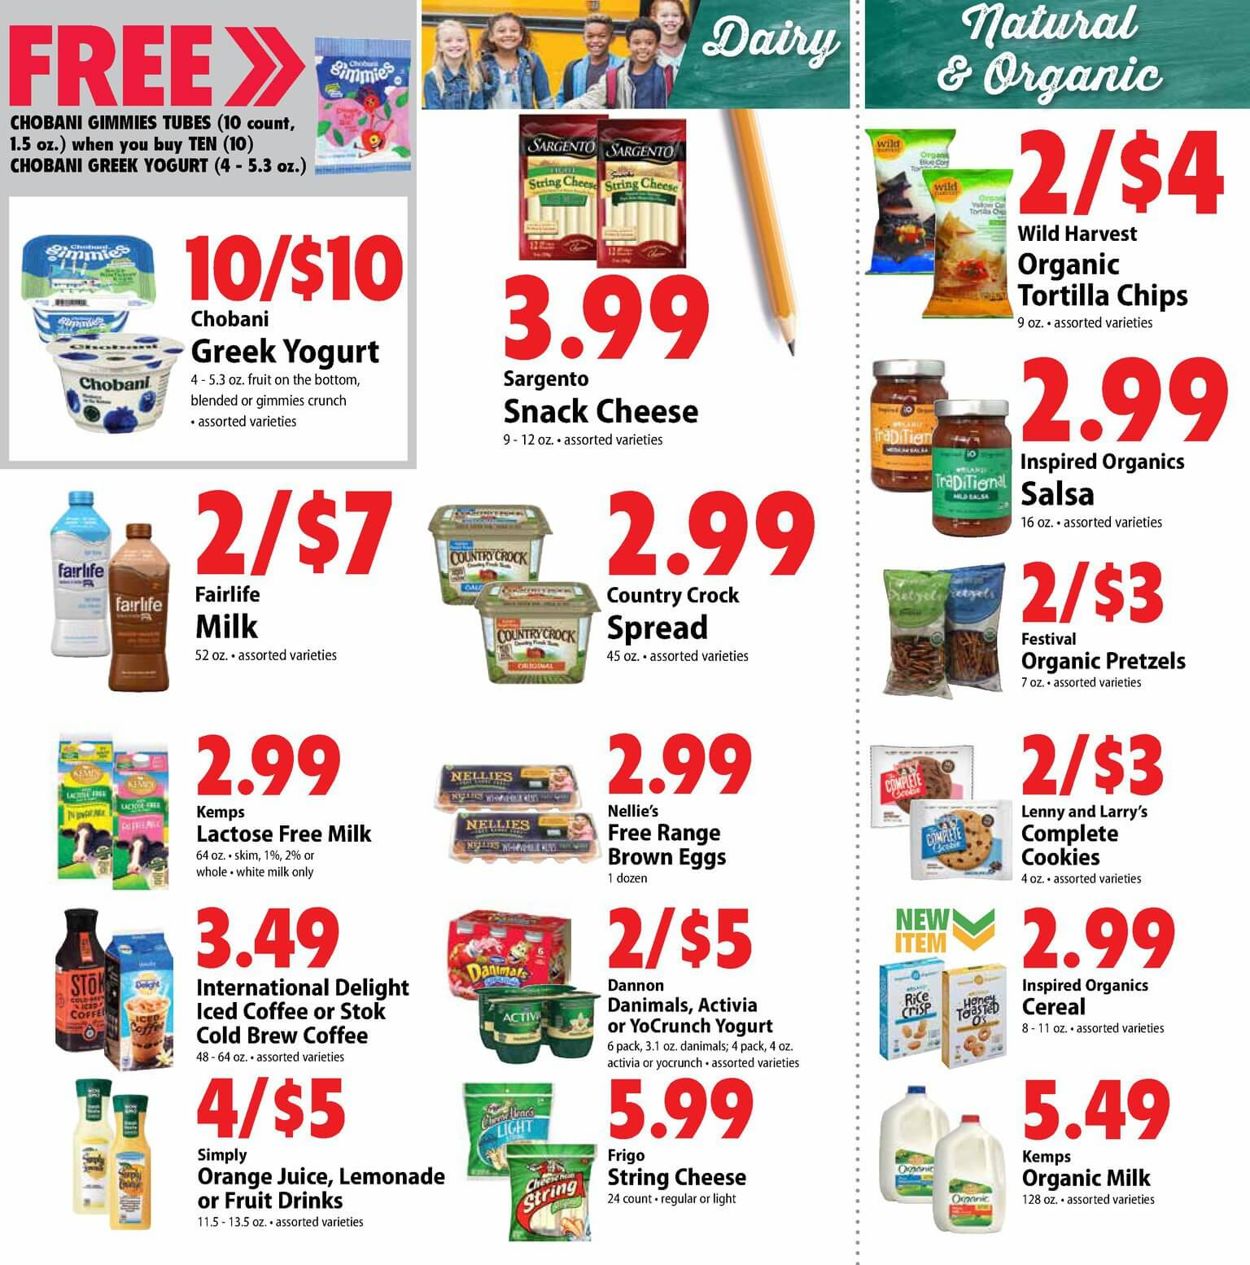 Festival Foods Current weekly ad 08/14 - 08/20/2019 [14] - frequent-ads.com